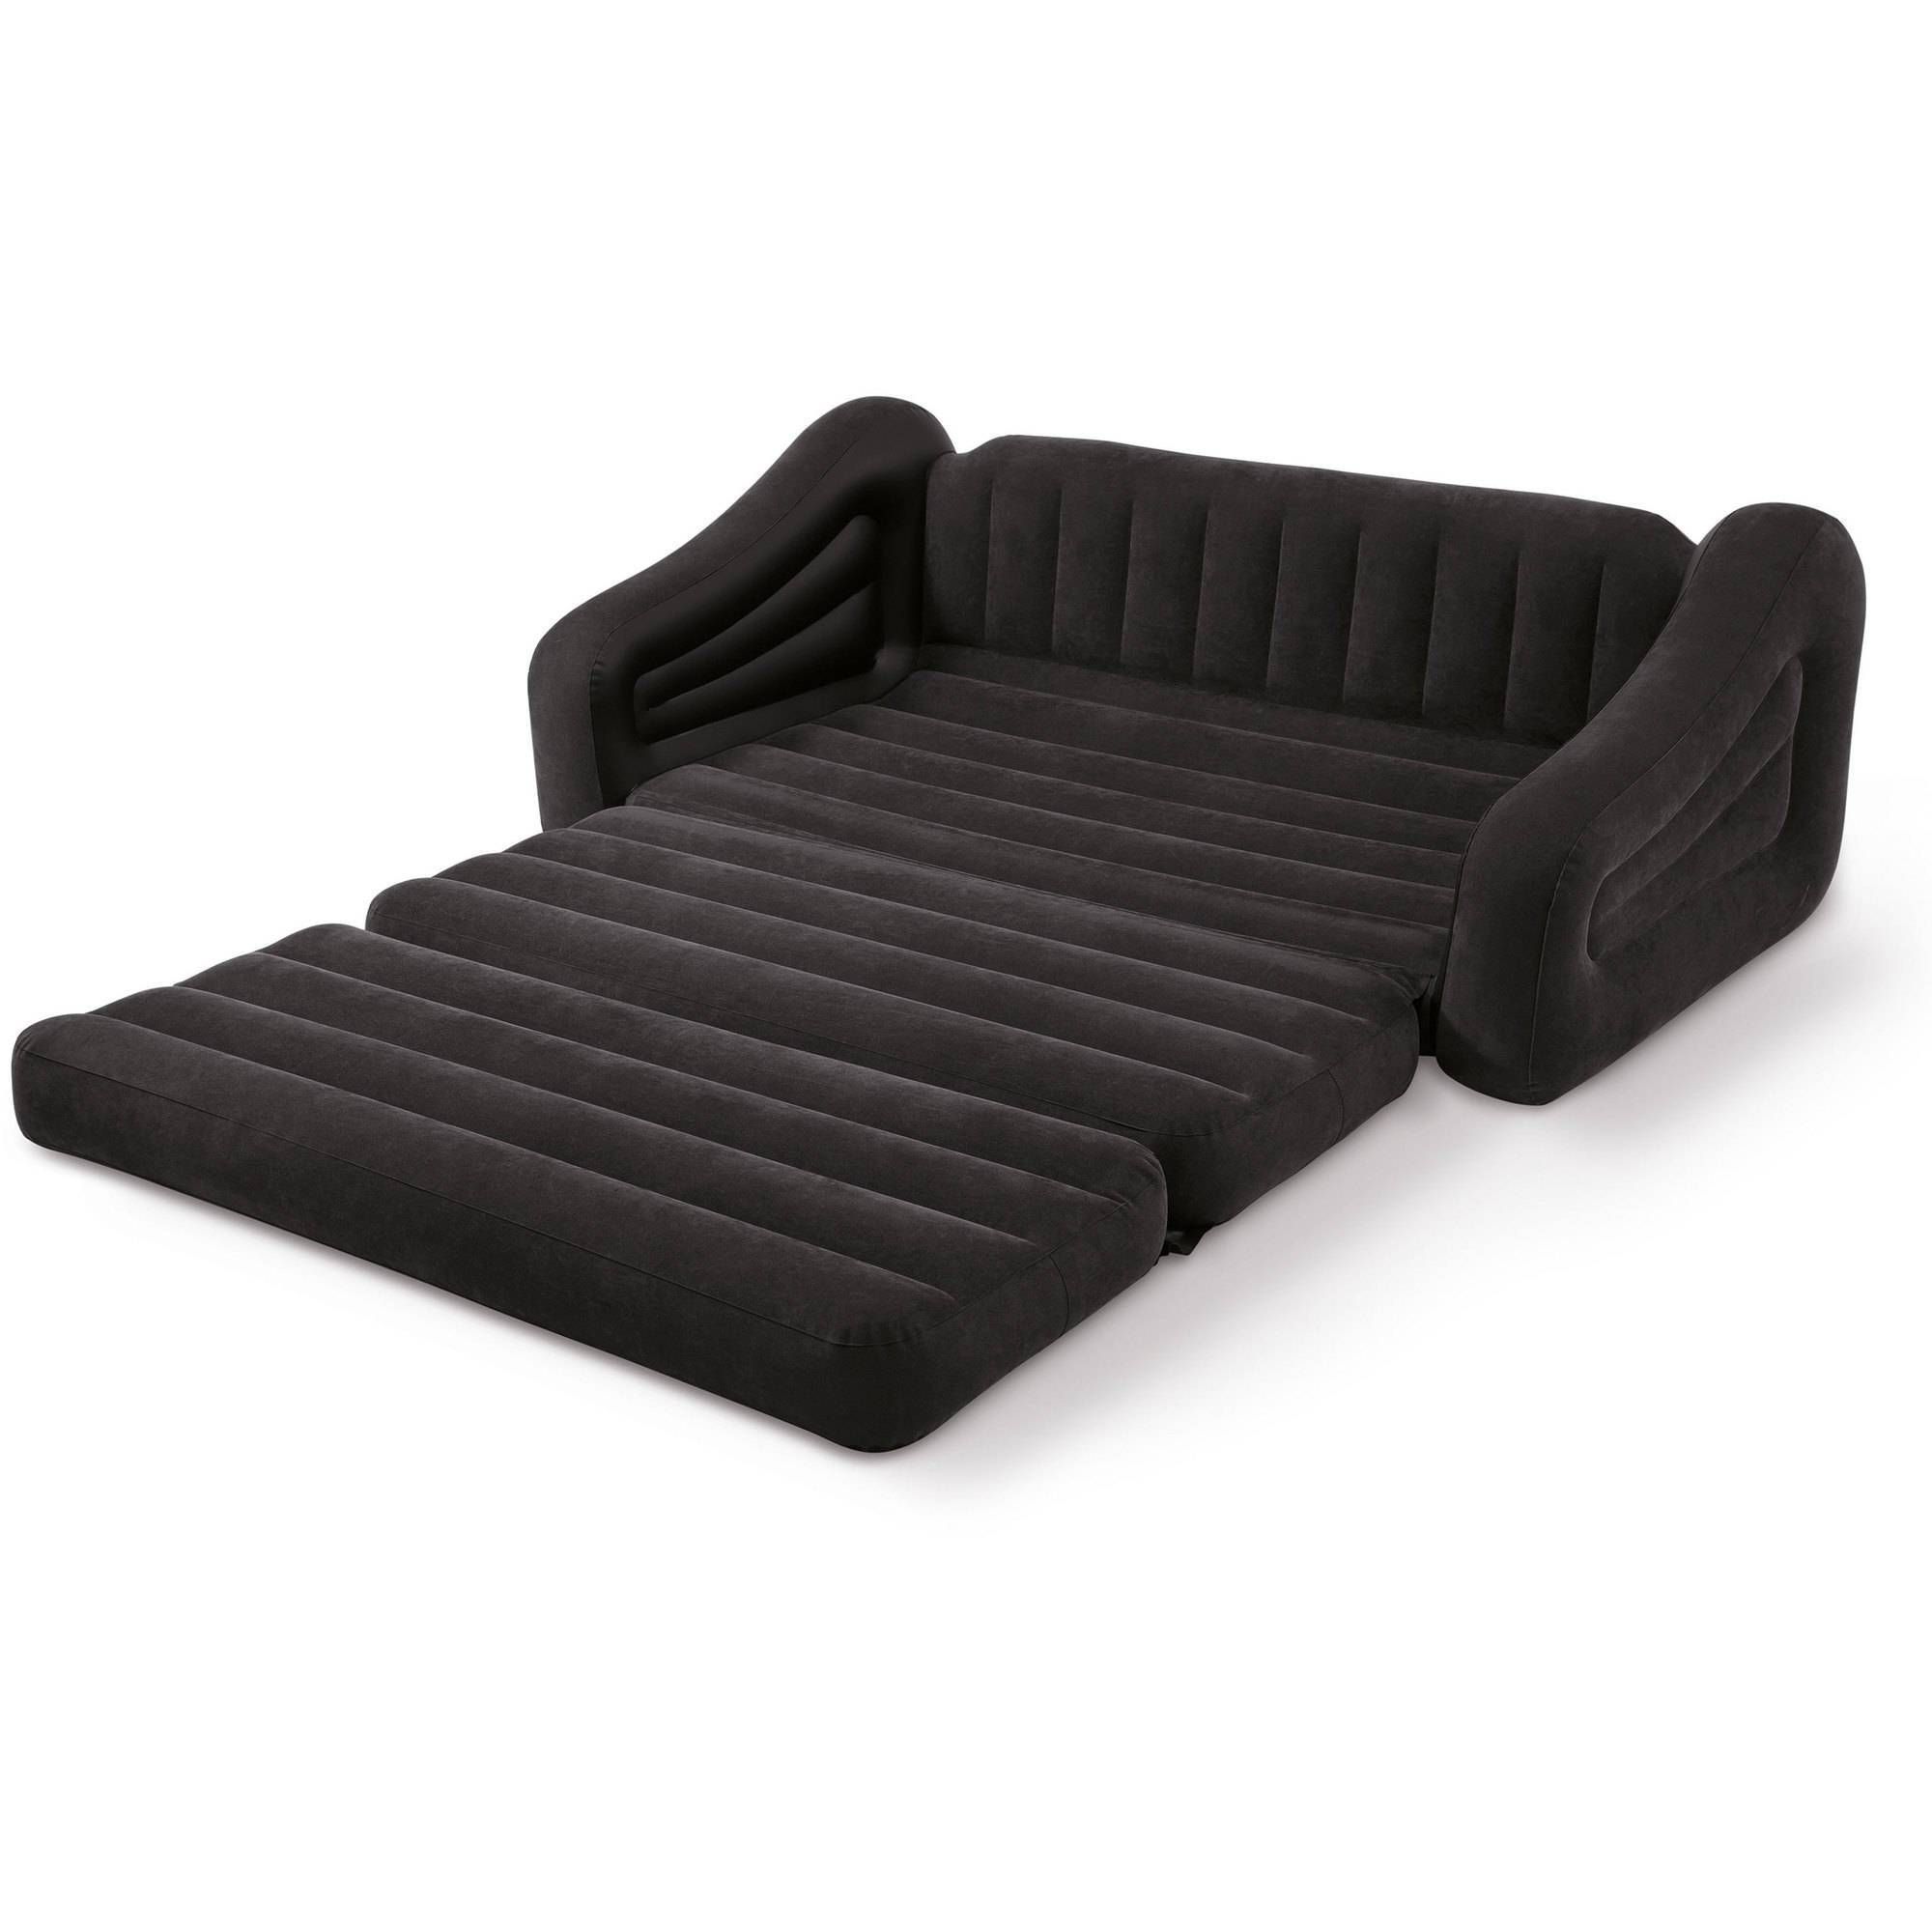 Outstanding Intex Inflatable Couch 142 Intex Inflatable Couch Bed Within Intex Air Couches (View 3 of 15)